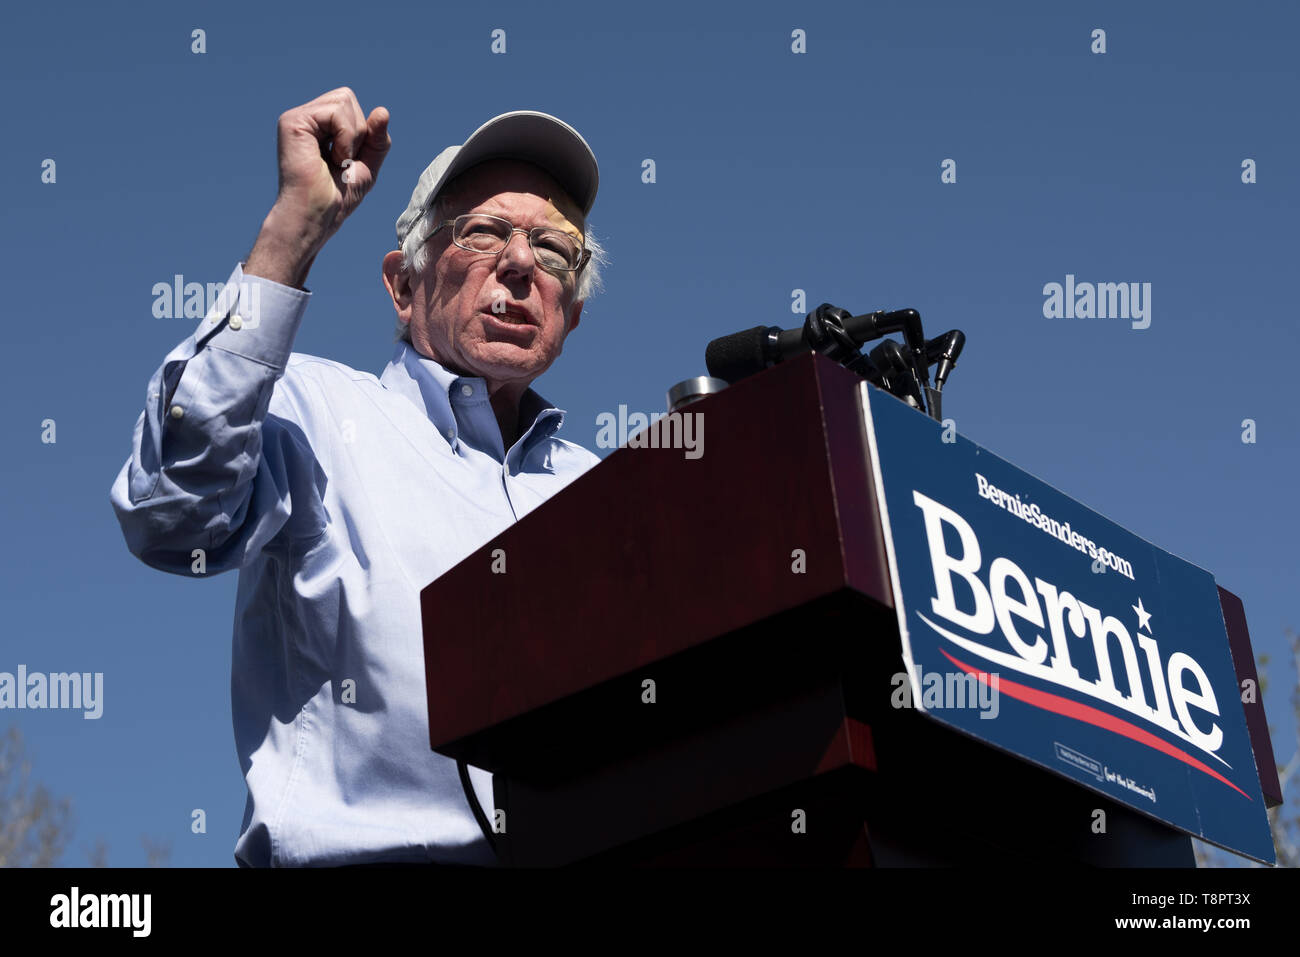 Henderson, Nevada, USA. 16th Mar, 2019. U.S. Senator and presidential candidate, Bernie Sanders seen speaking during the campaign rally in Henderson. Credit: Ronen Tivony/SOPA Images/ZUMA Wire/Alamy Live News Stock Photo